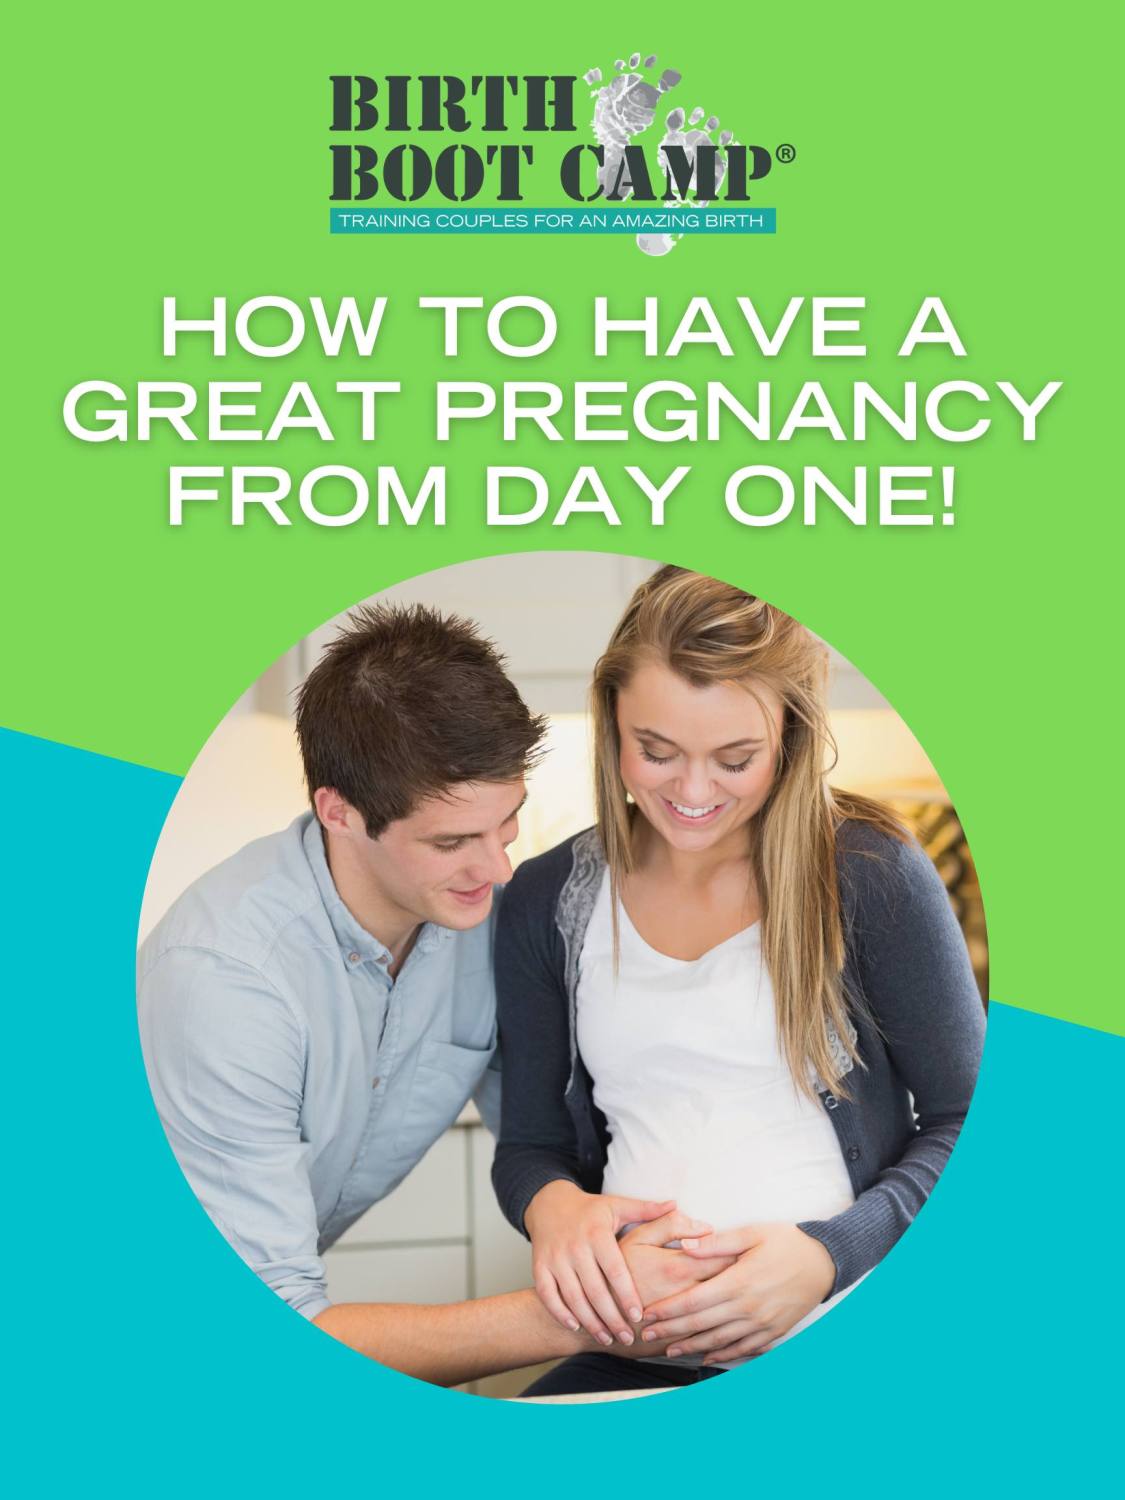 How to Have a Great Pregnancy From Day One!